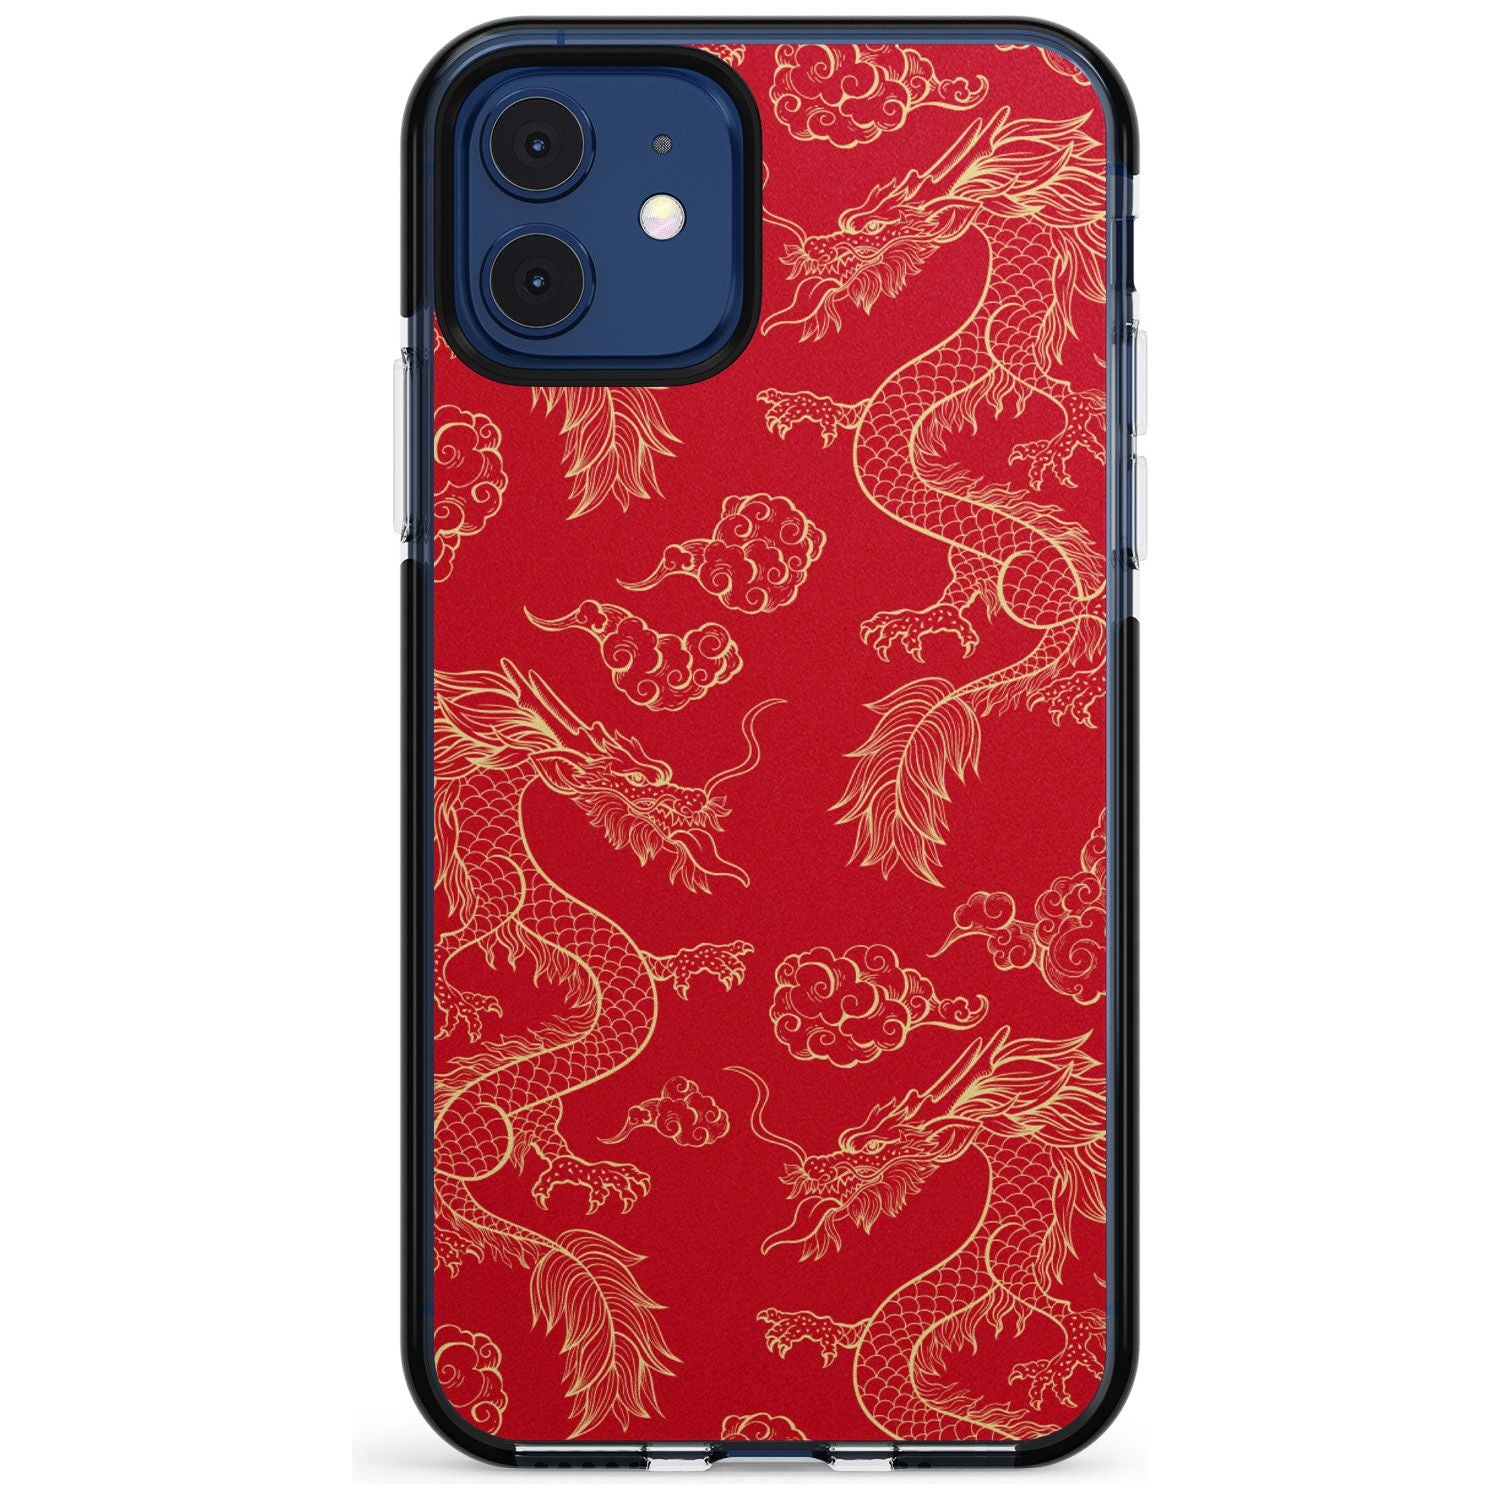 Red and Gold Dragon Pattern Black Impact Phone Case for iPhone 11 Pro Max